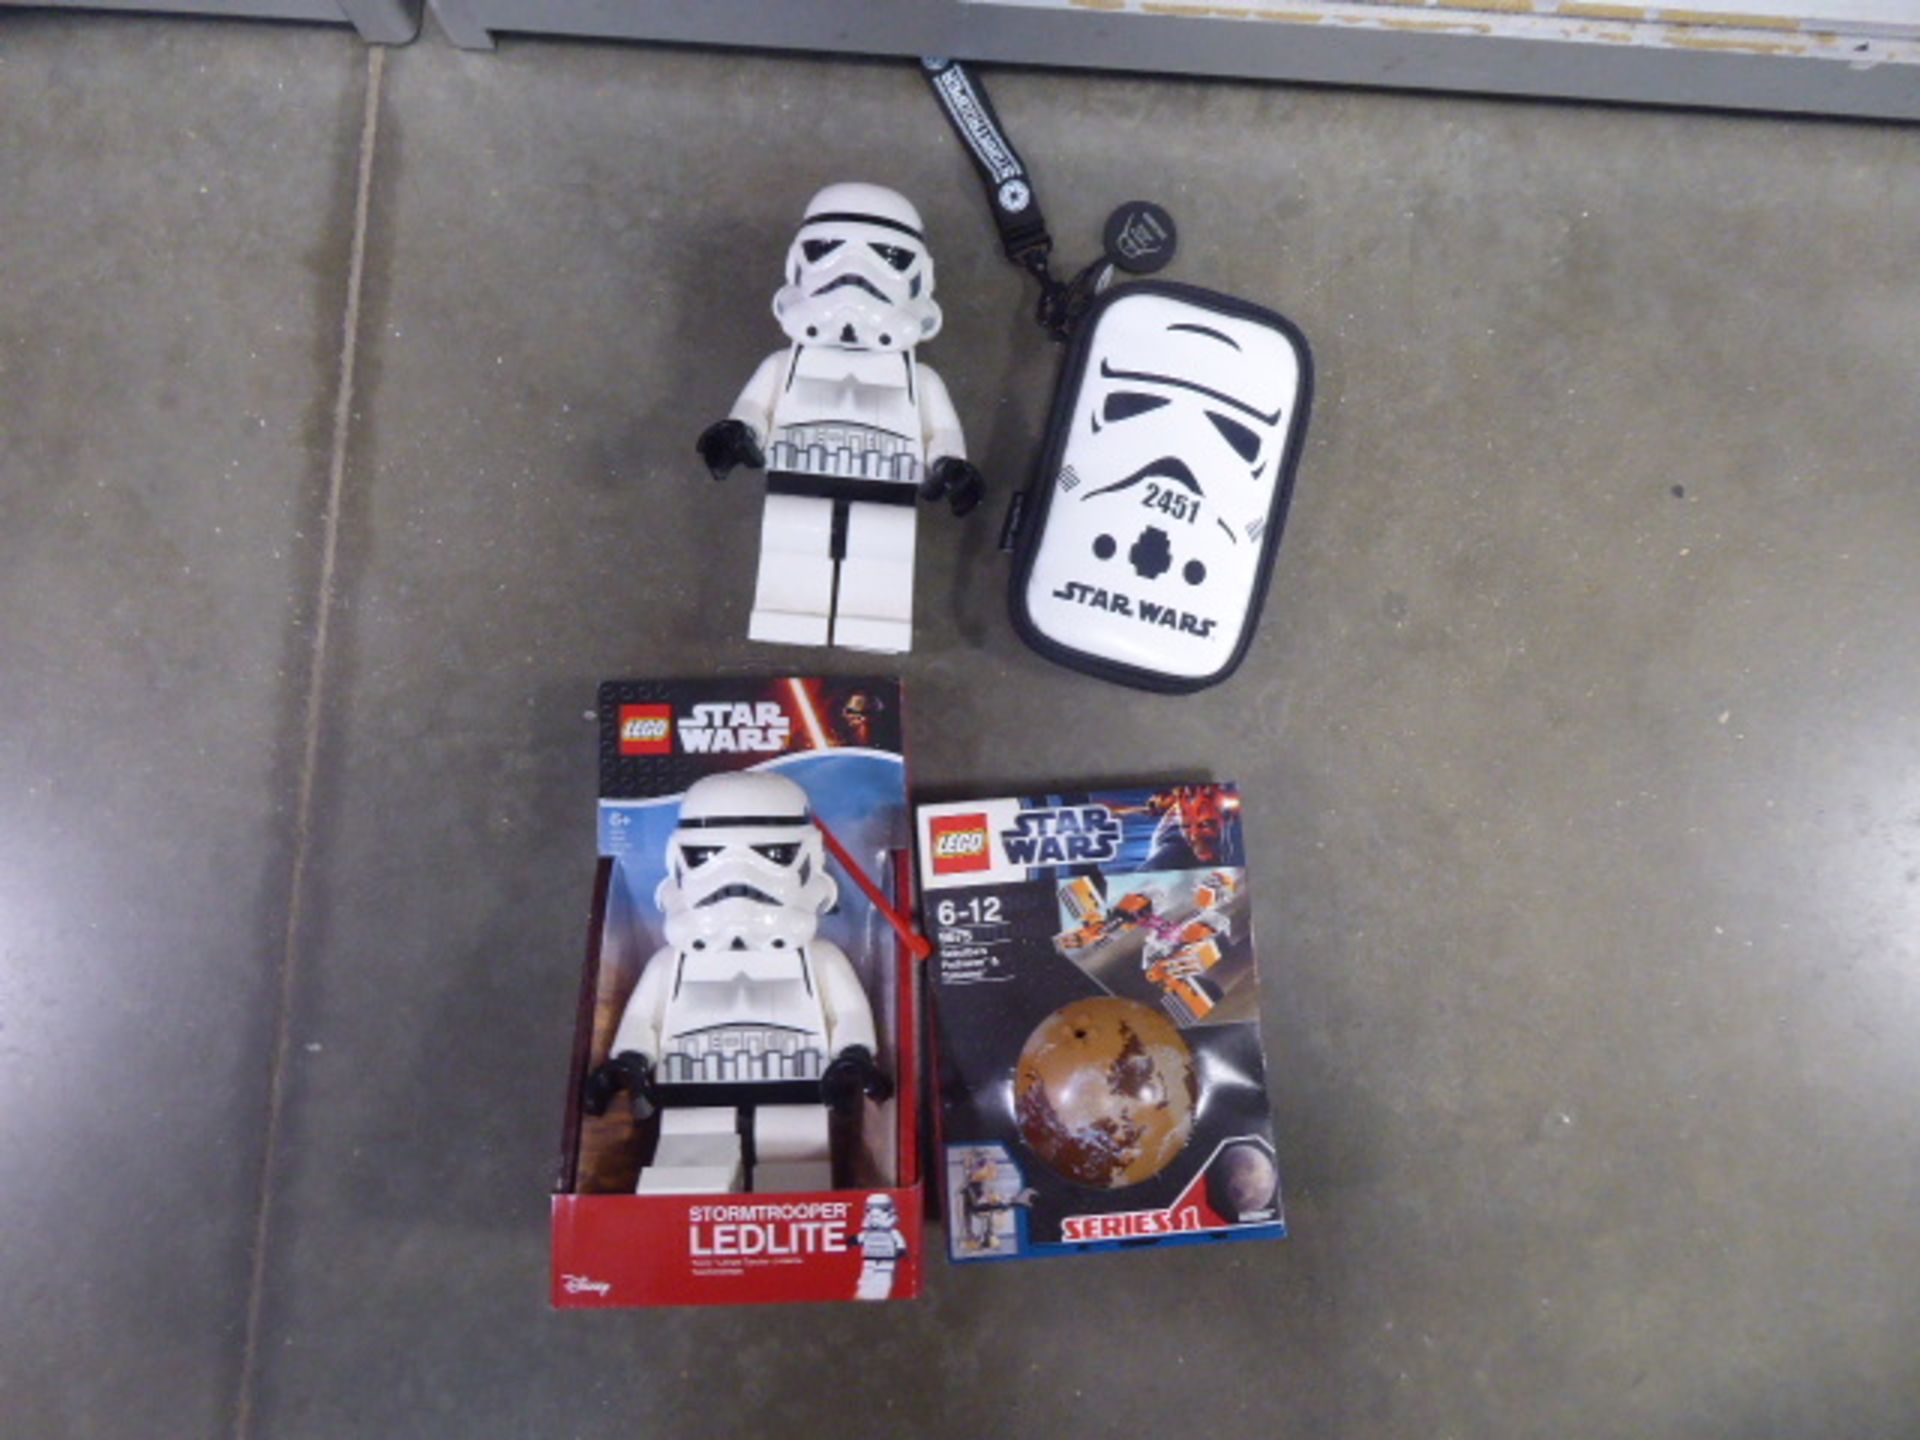 Selection of Lego and other Star Wars collectibles to include stormtrooper LED light figure - Image 2 of 2